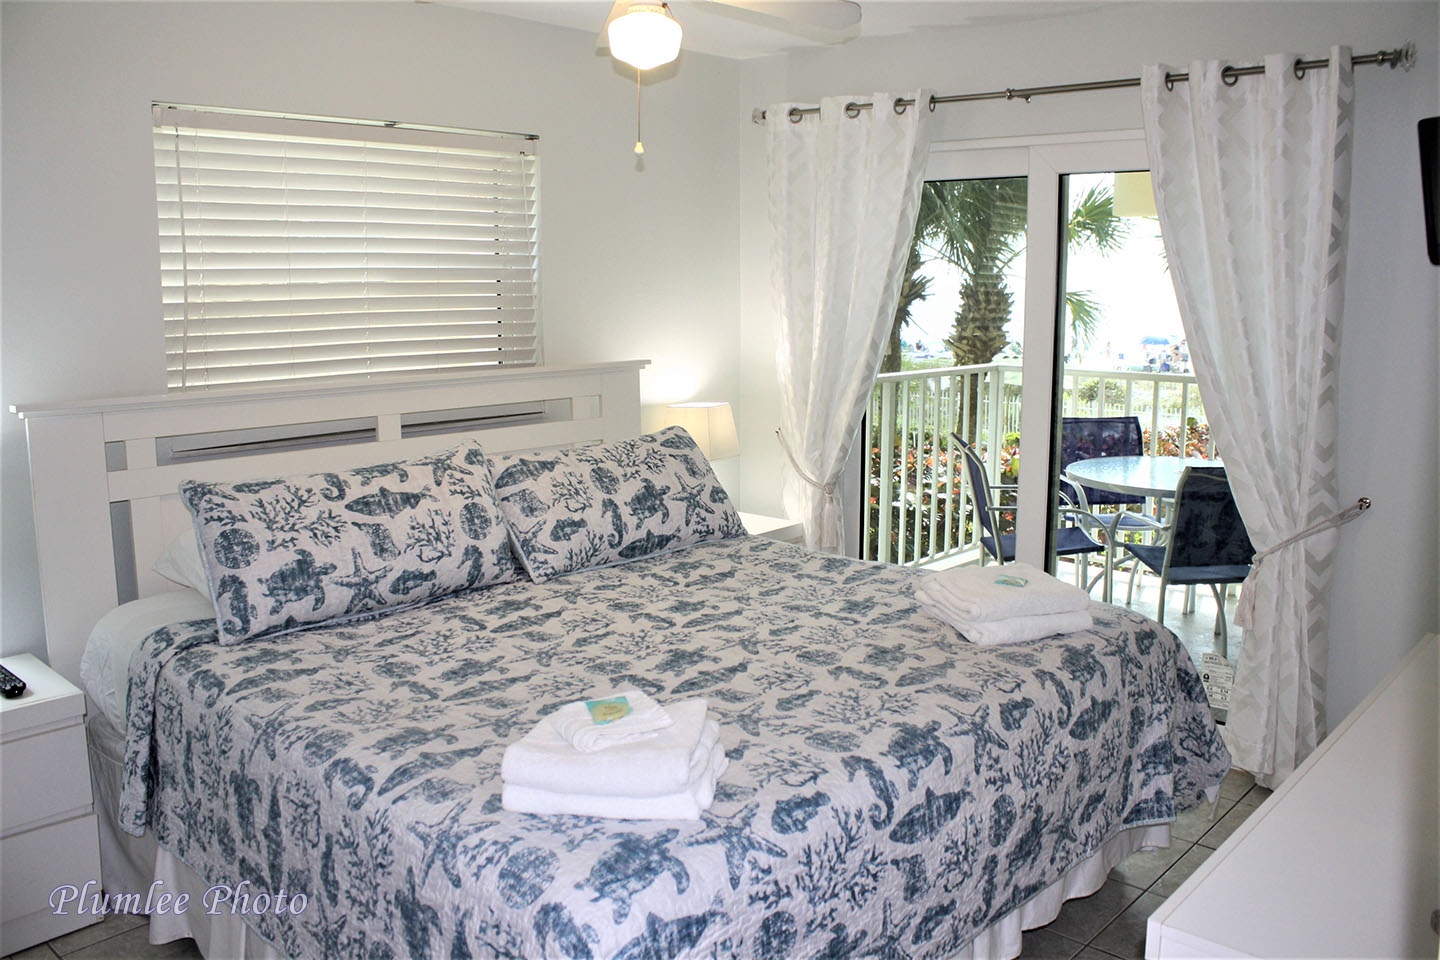 The Master Bedroom has a king size bed and view of the Gulf.